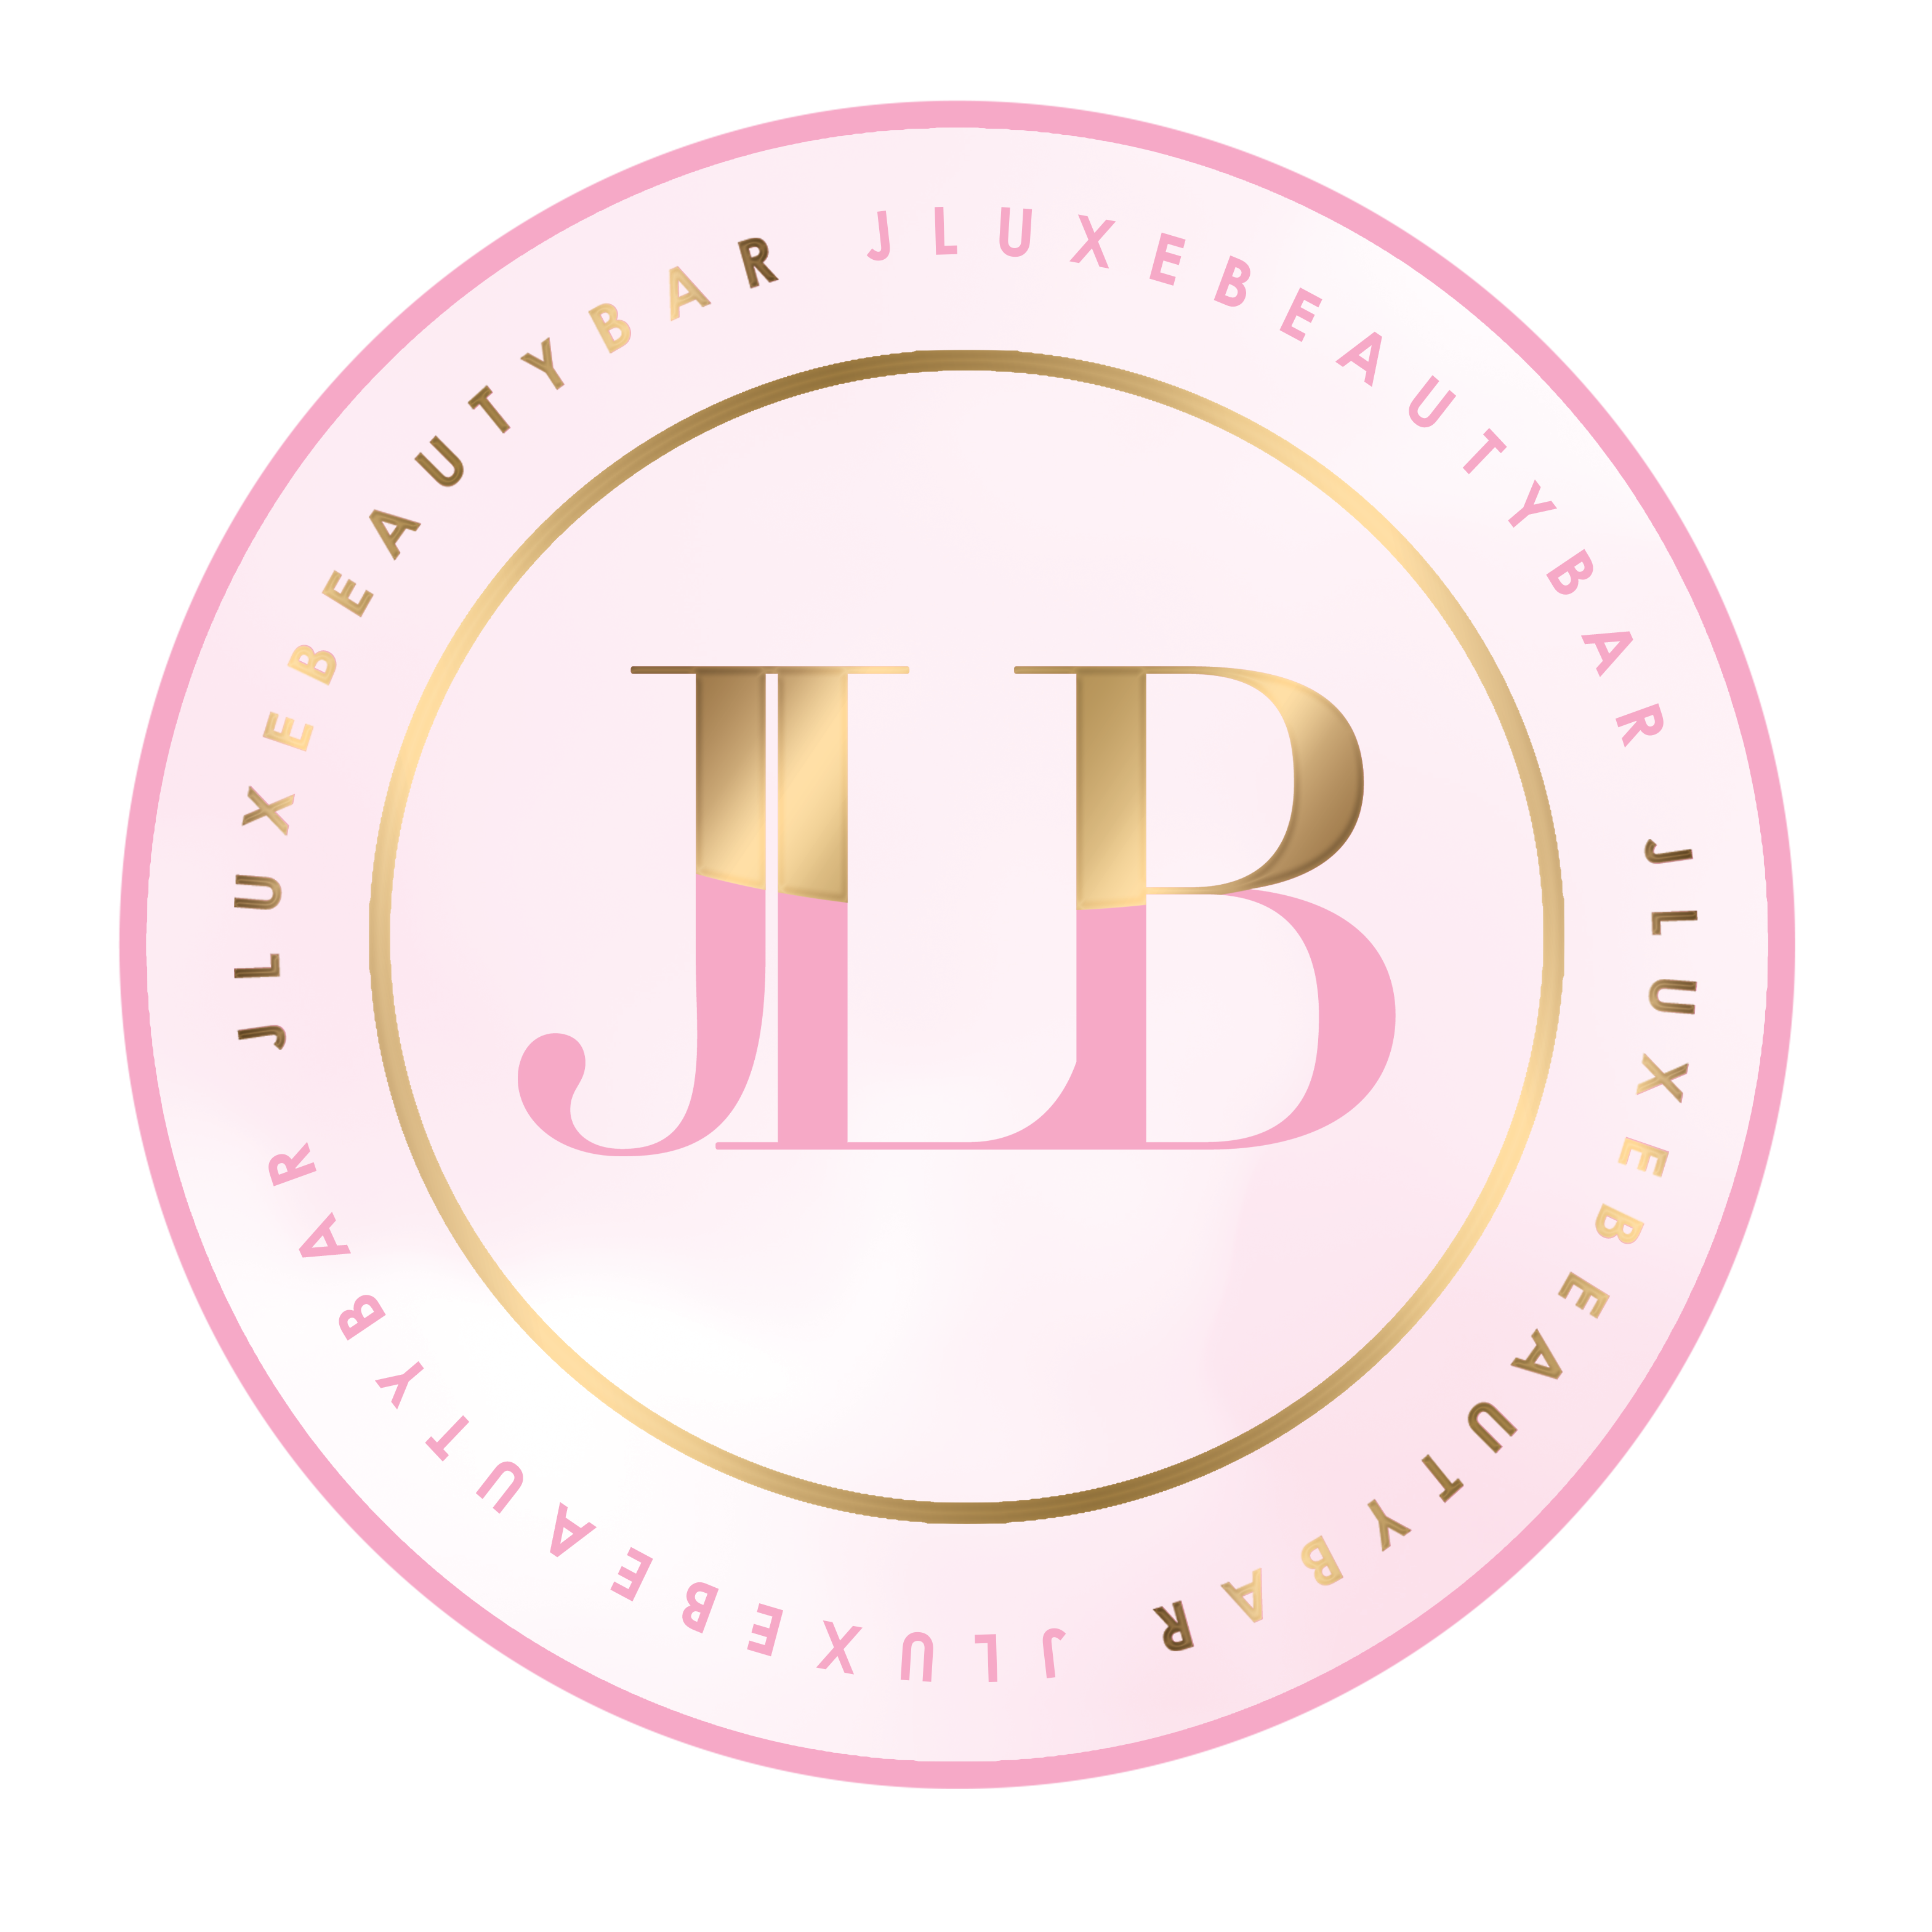 Tooth Gem Training (No Kit) – J Luxe Beauty Bar